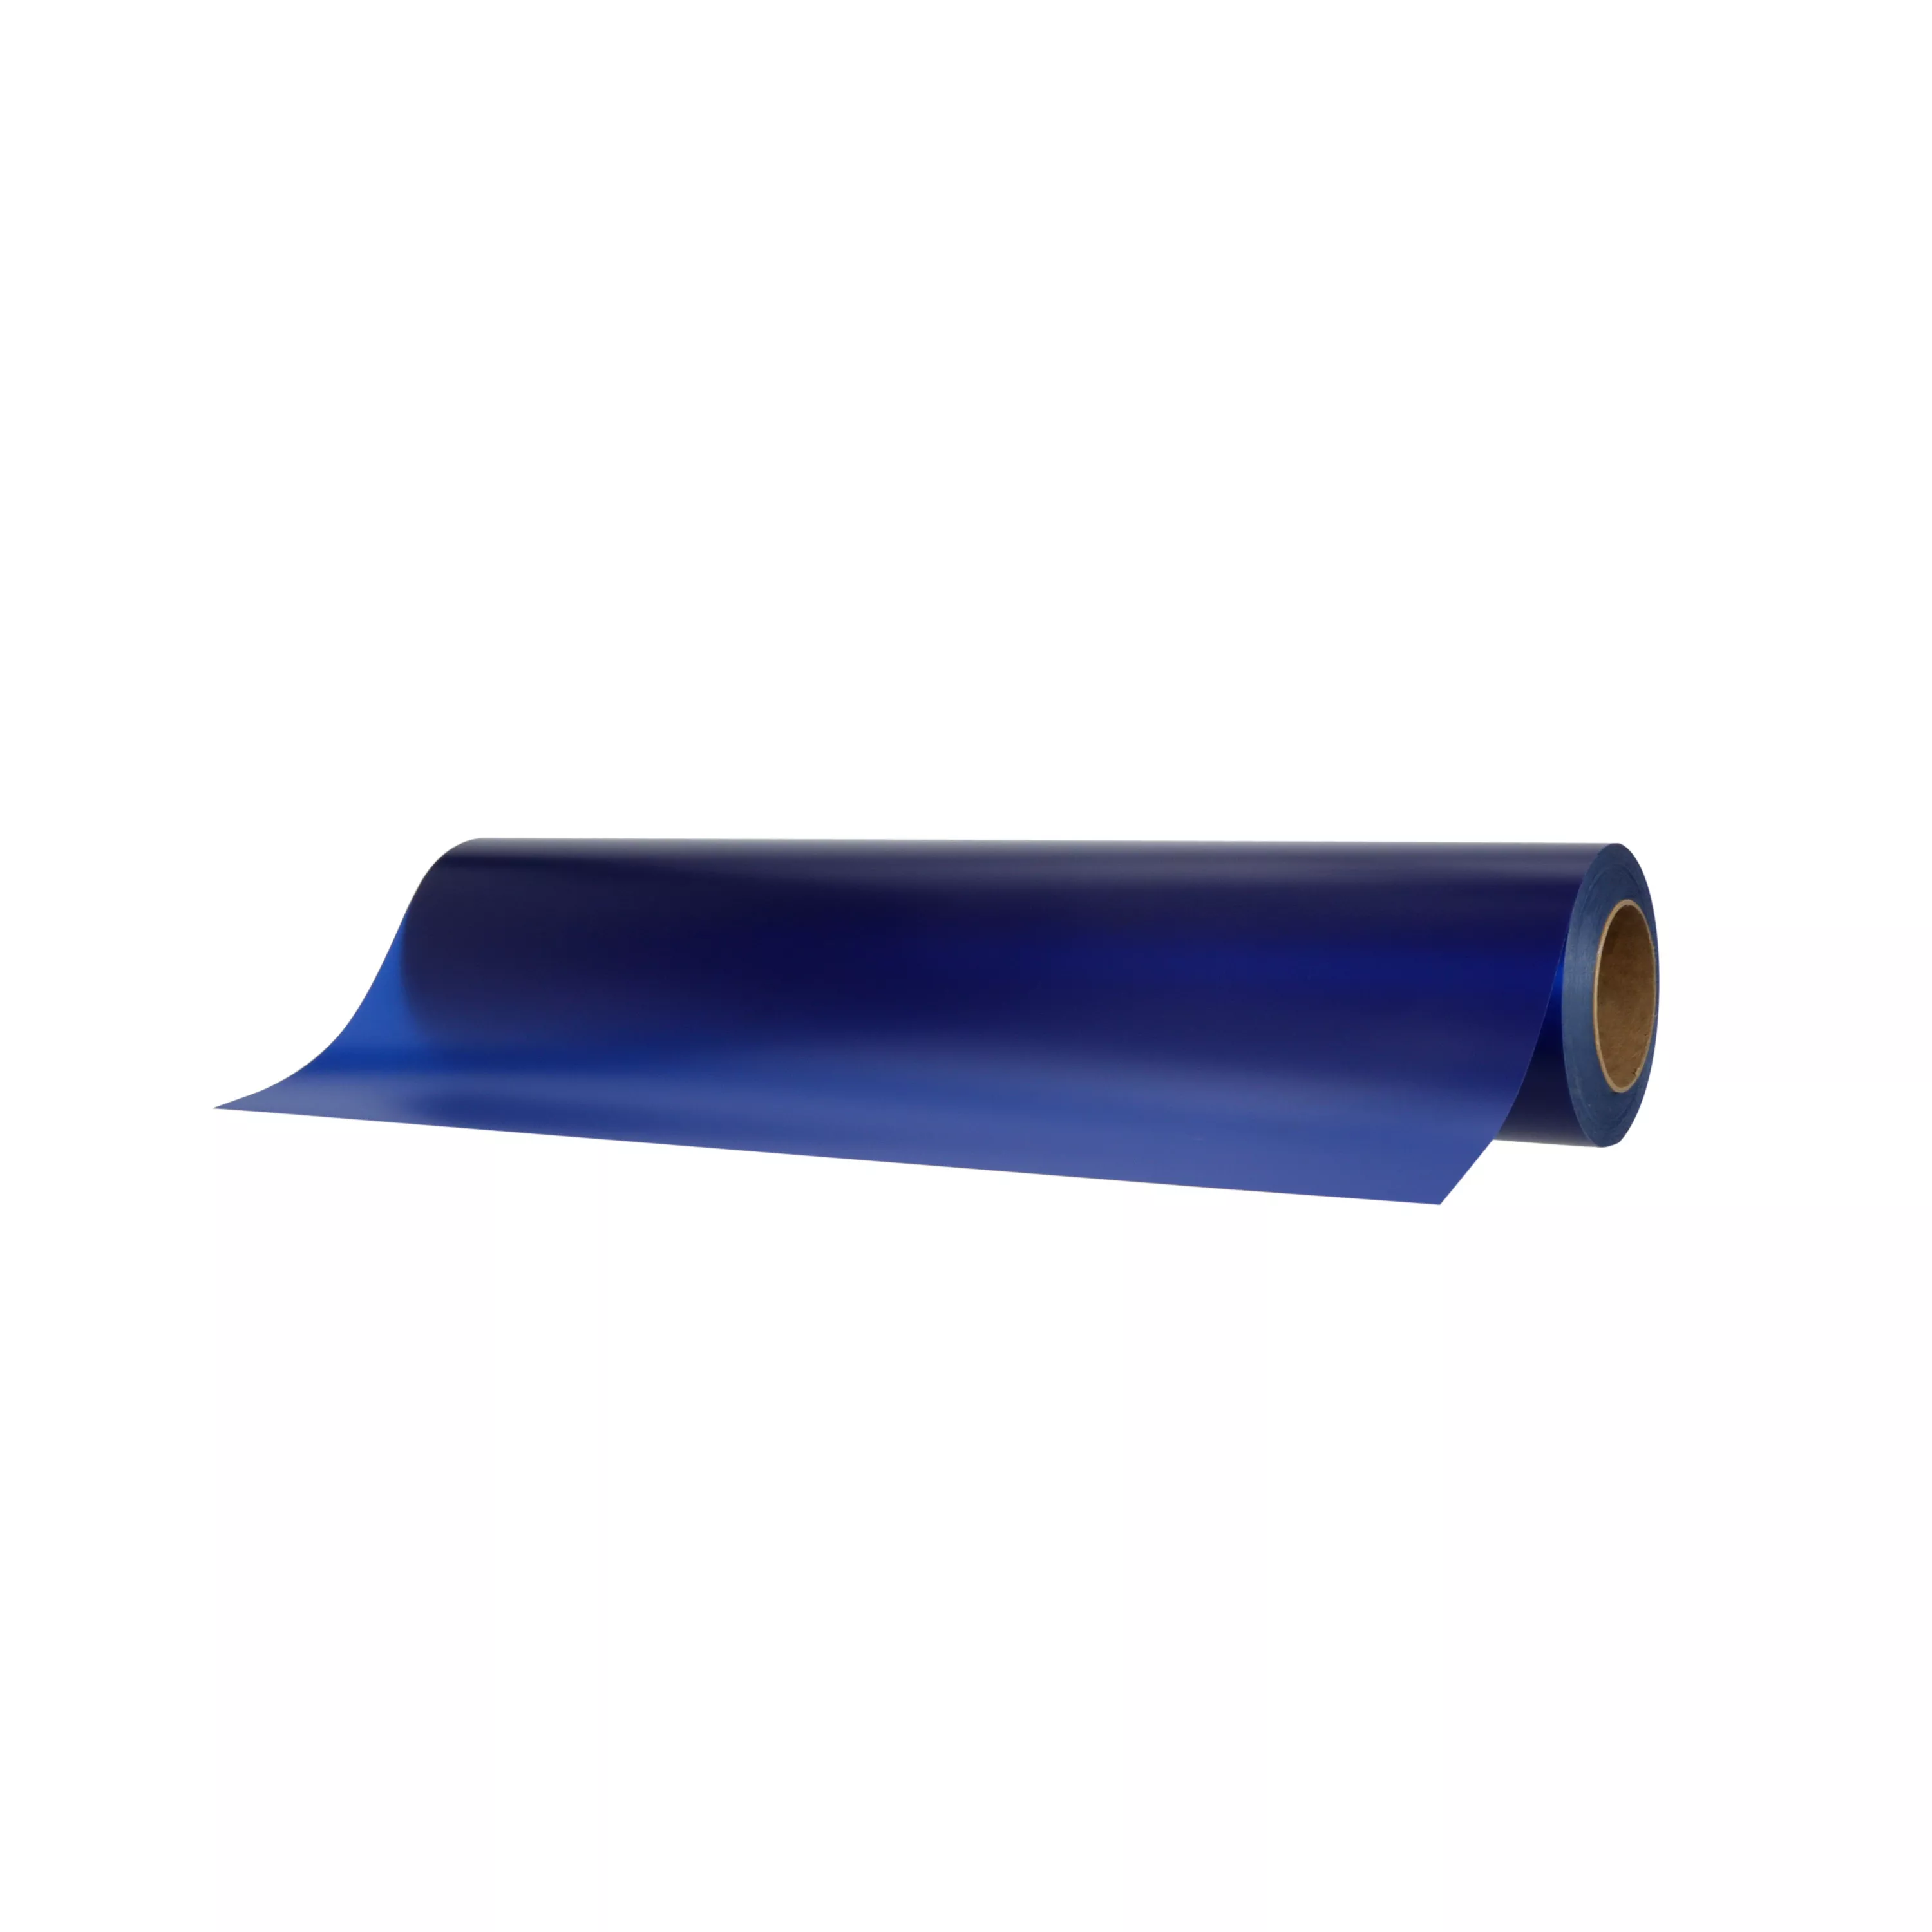 3M™ Scotchcal™ Translucent Graphic Film 3630-27, Electric Blue, 48 in x
50 yd, 1 Roll/Case